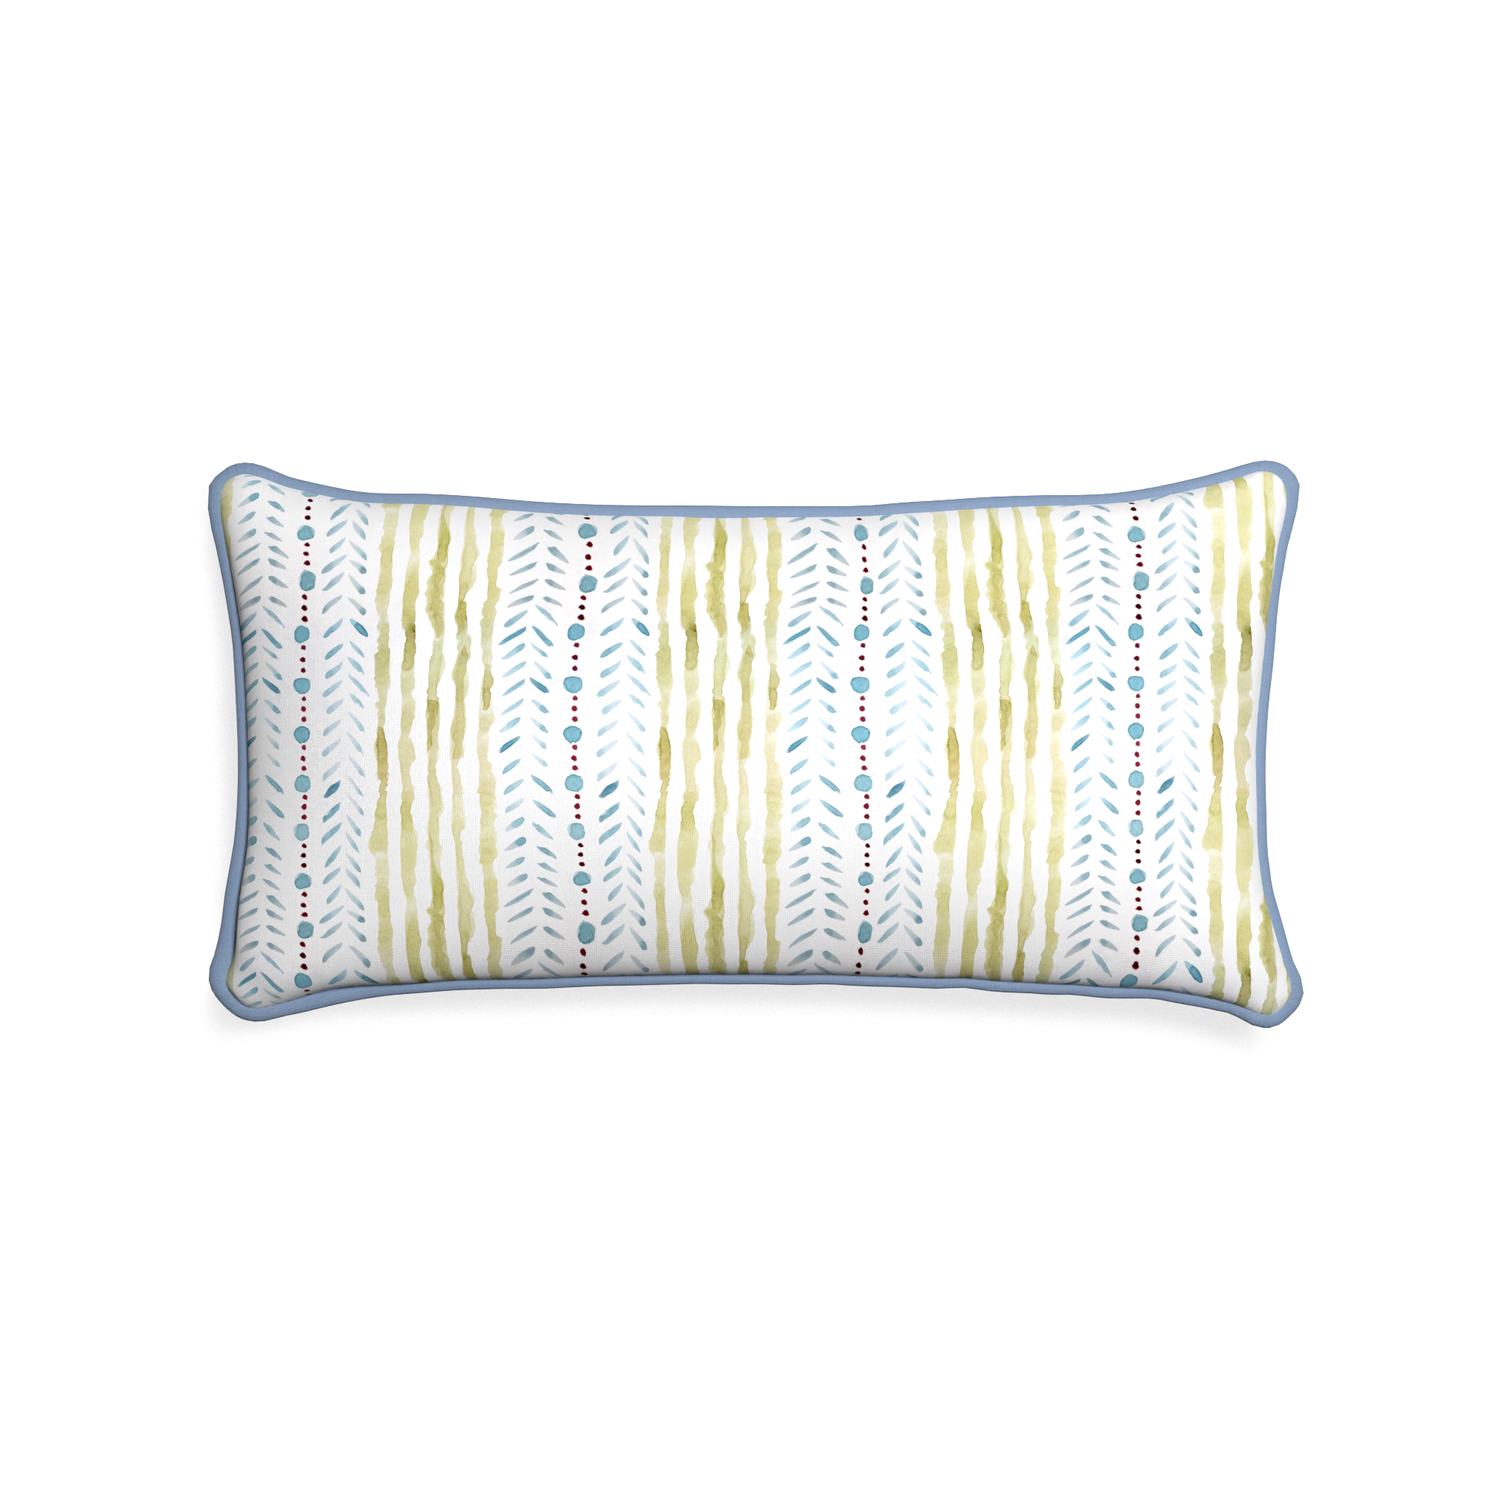 Midi-lumbar julia custom blue & green stripedpillow with sky piping on white background